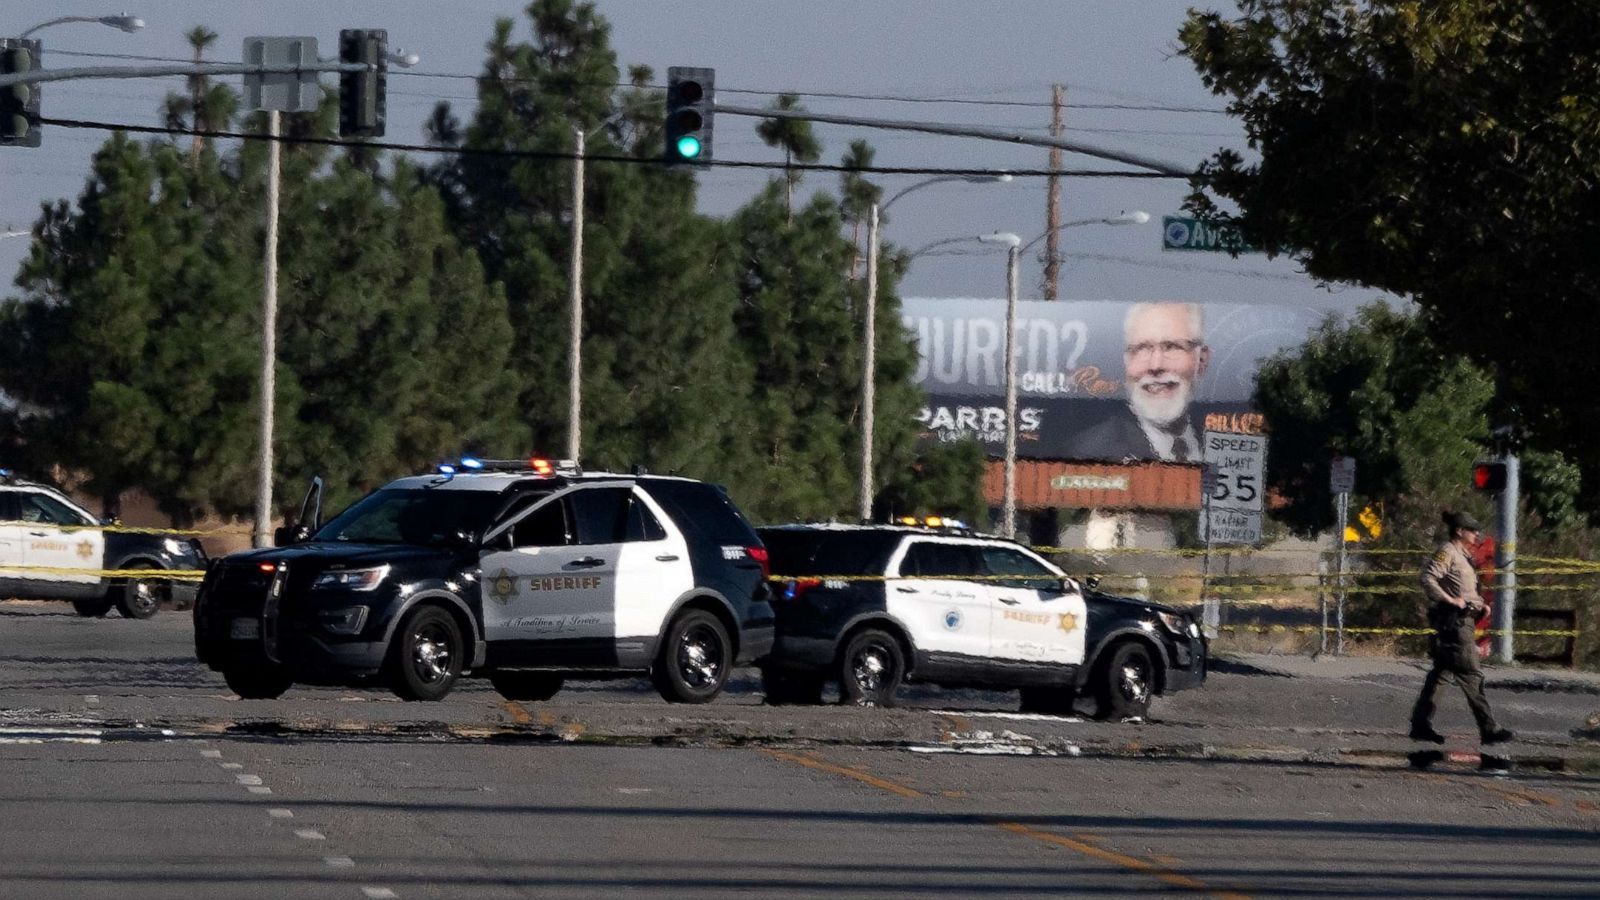 Person of Interest Detained in Fatal Shooting of Los Angeles County Sheriff’s Deputy